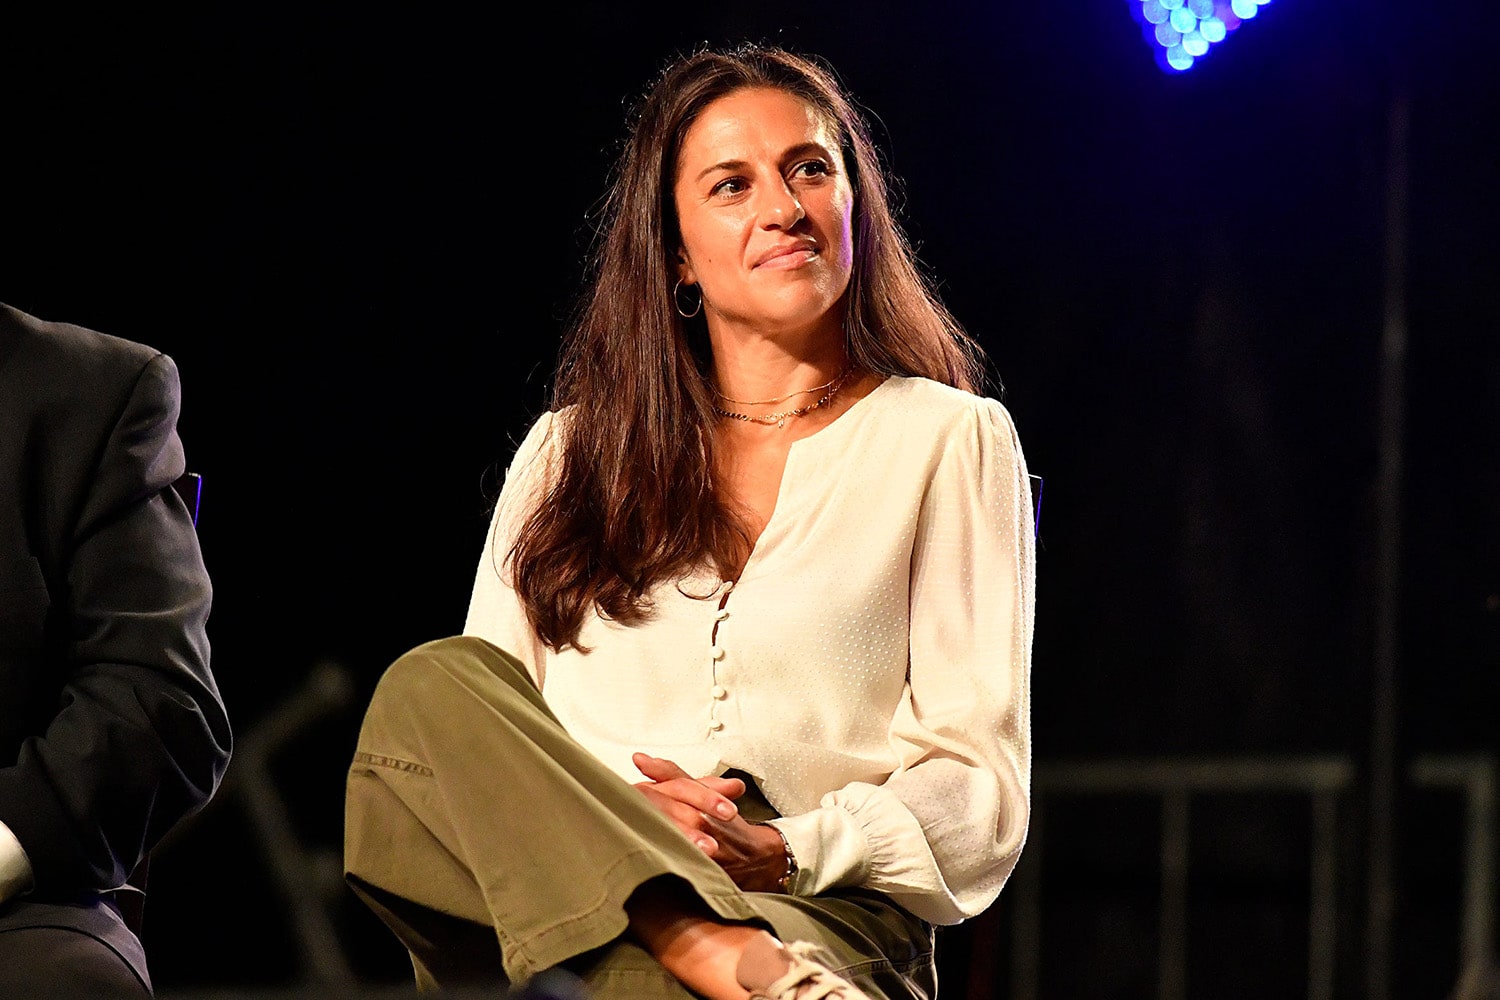 Former USWNT player Carli Lloyd sitting on stage and answering questions